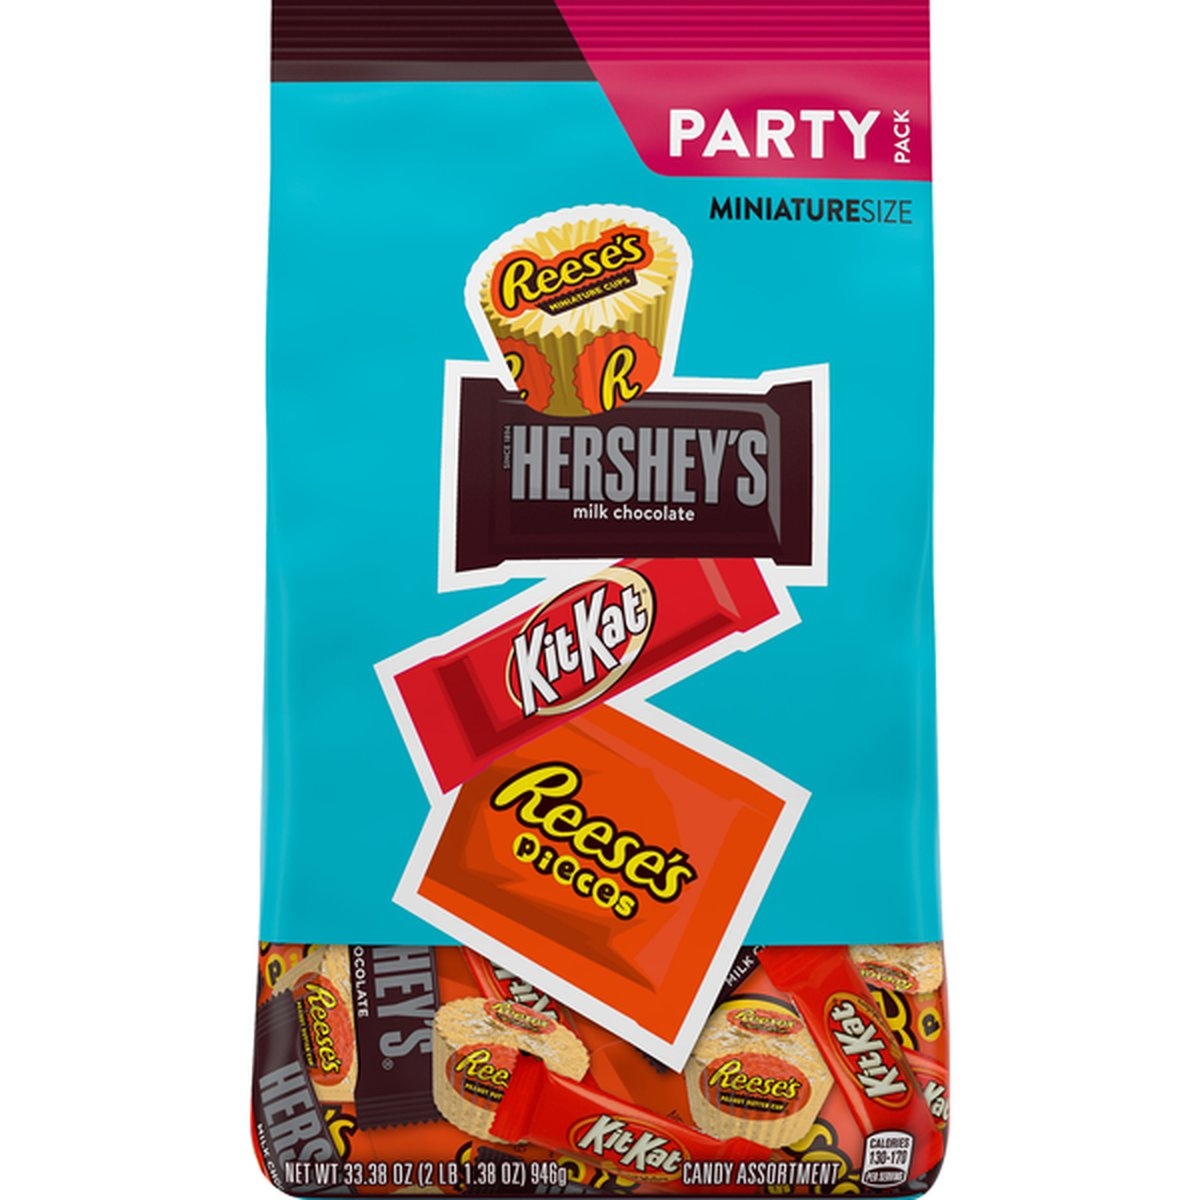 slide 1 of 1, Hershey Chocolate Candy, Miniature Size, Party Pack, 33.38 oz